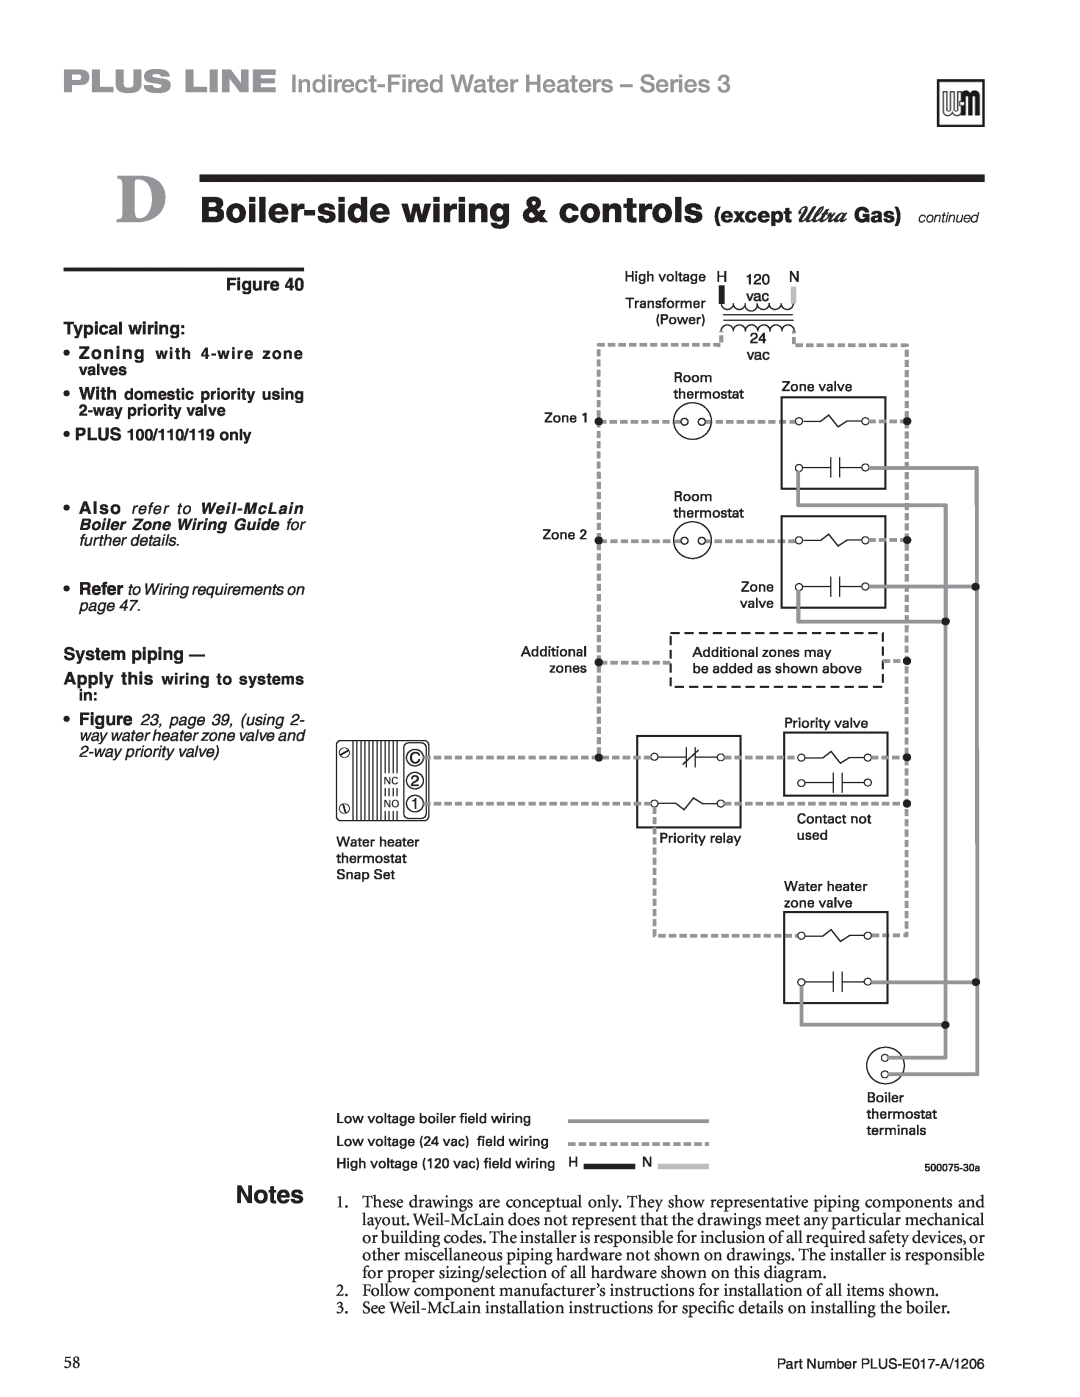 Weil-McLain PLUS-E017-A/1206 manual PLUS LINE Indirect-FiredWater Heaters - Series, Figure Typical wiring, System piping 